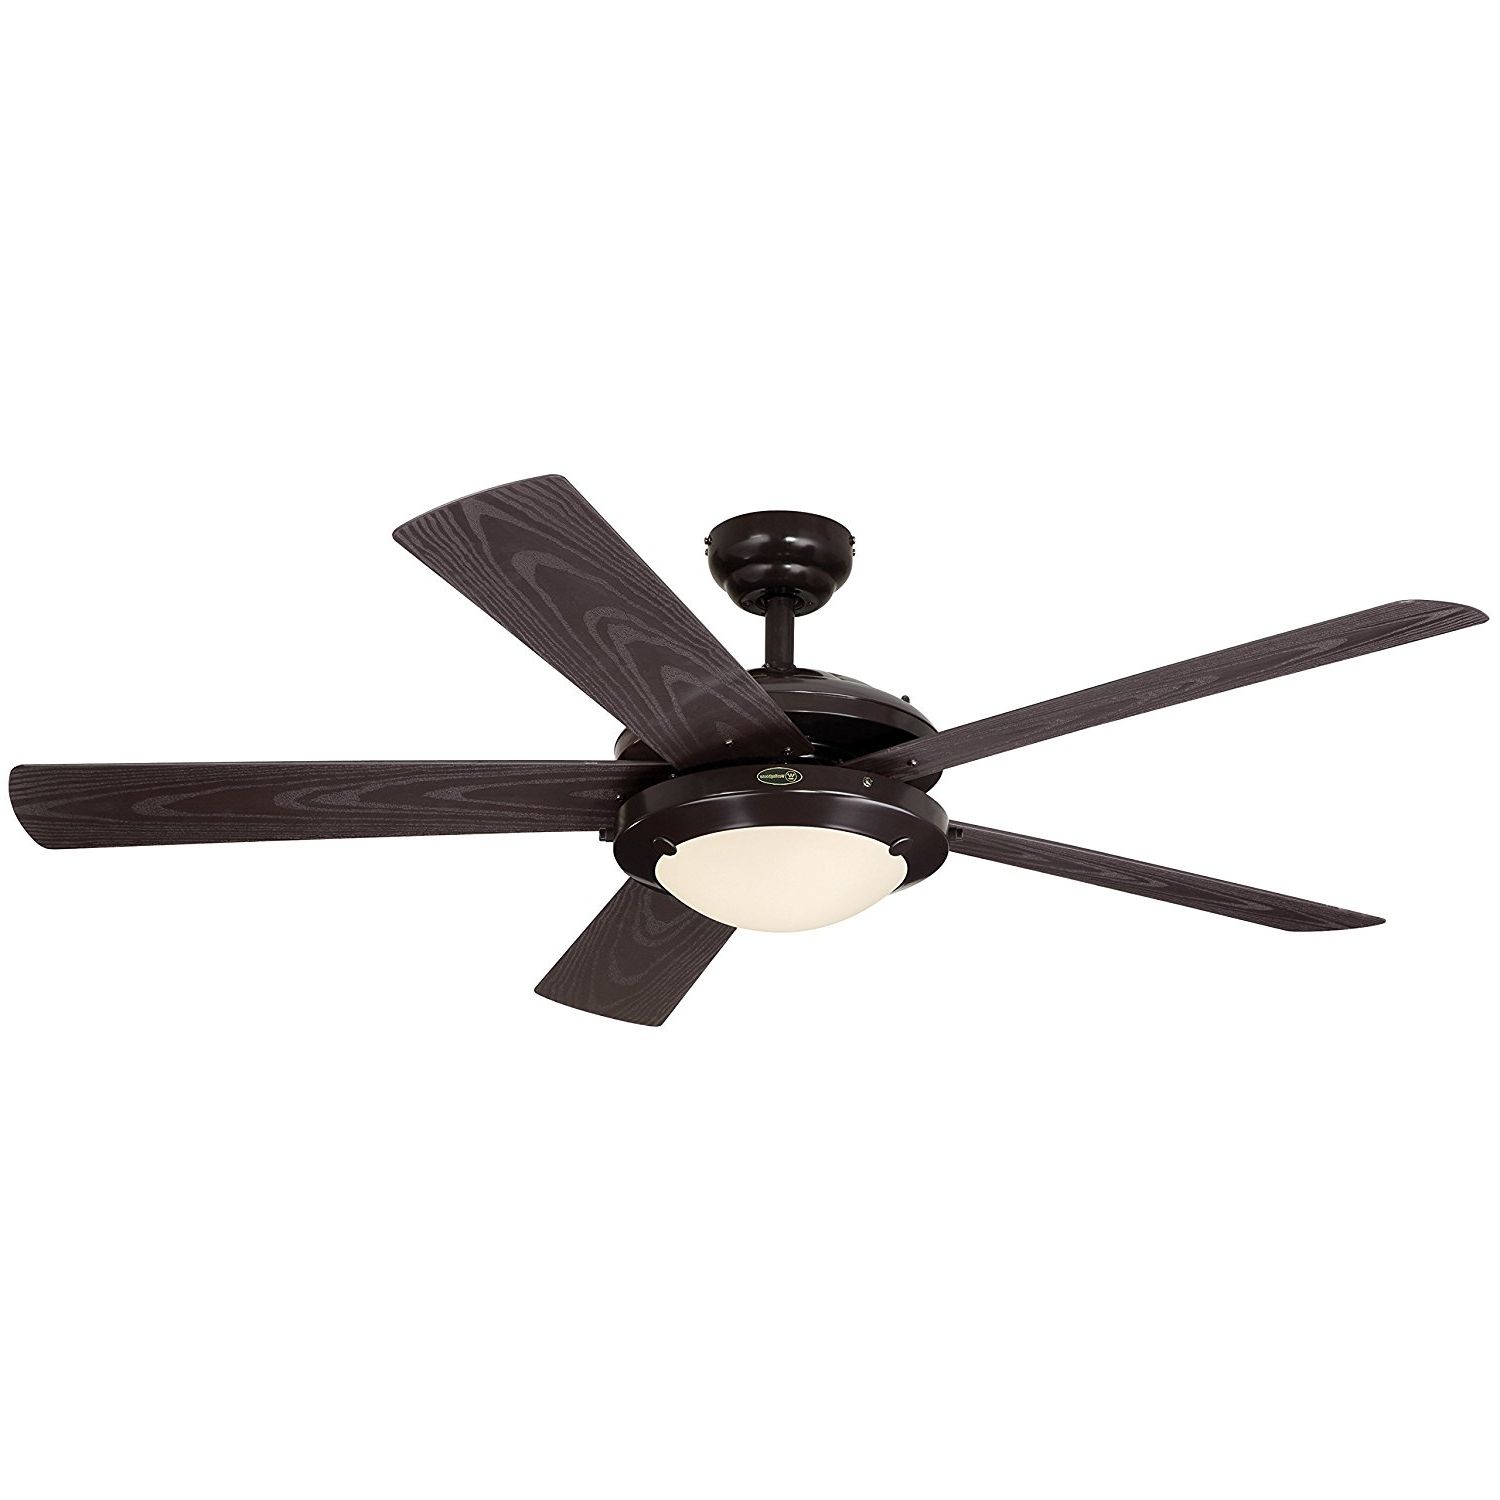 Wayfair Outdoor Ceiling Fans Throughout Widely Used Ceiling Fan: Best Outdoor Ceiling Fans Ideas Best Outdoor Ceiling (View 7 of 20)